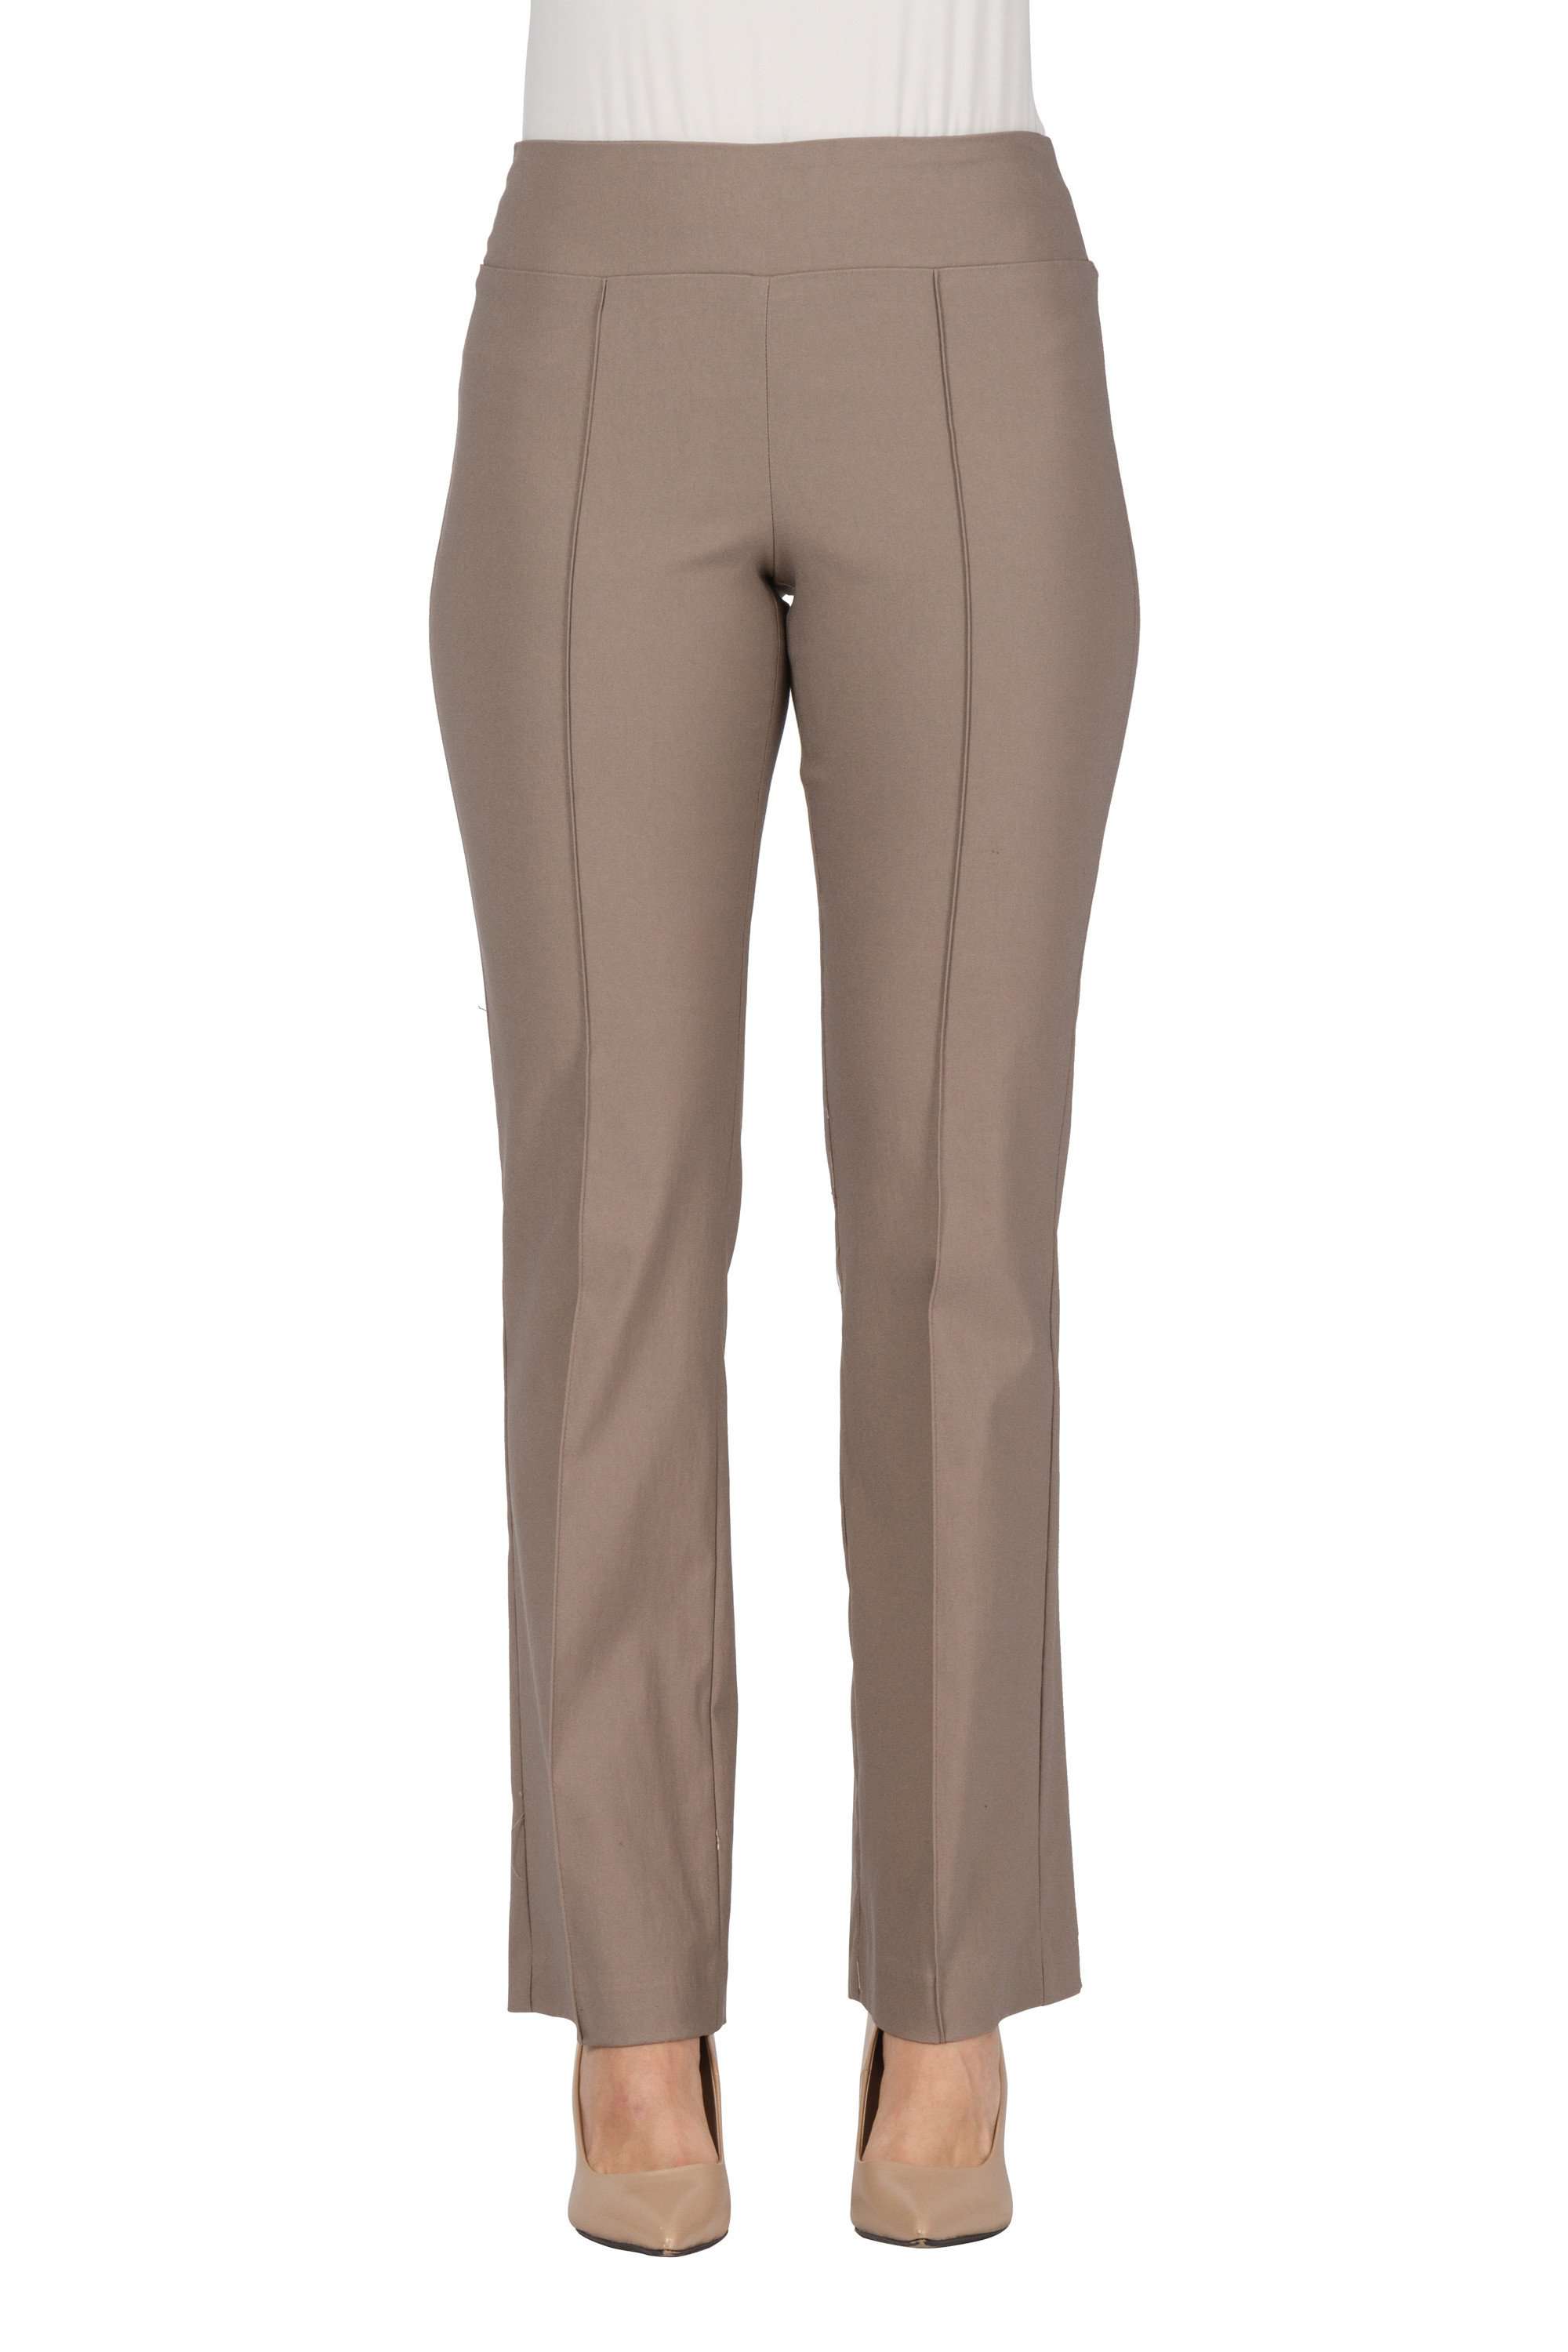 ladies Pants Taupe Beige Stretch Quality fabric Shop Made in Canada Yvonne  Marie Boutiques